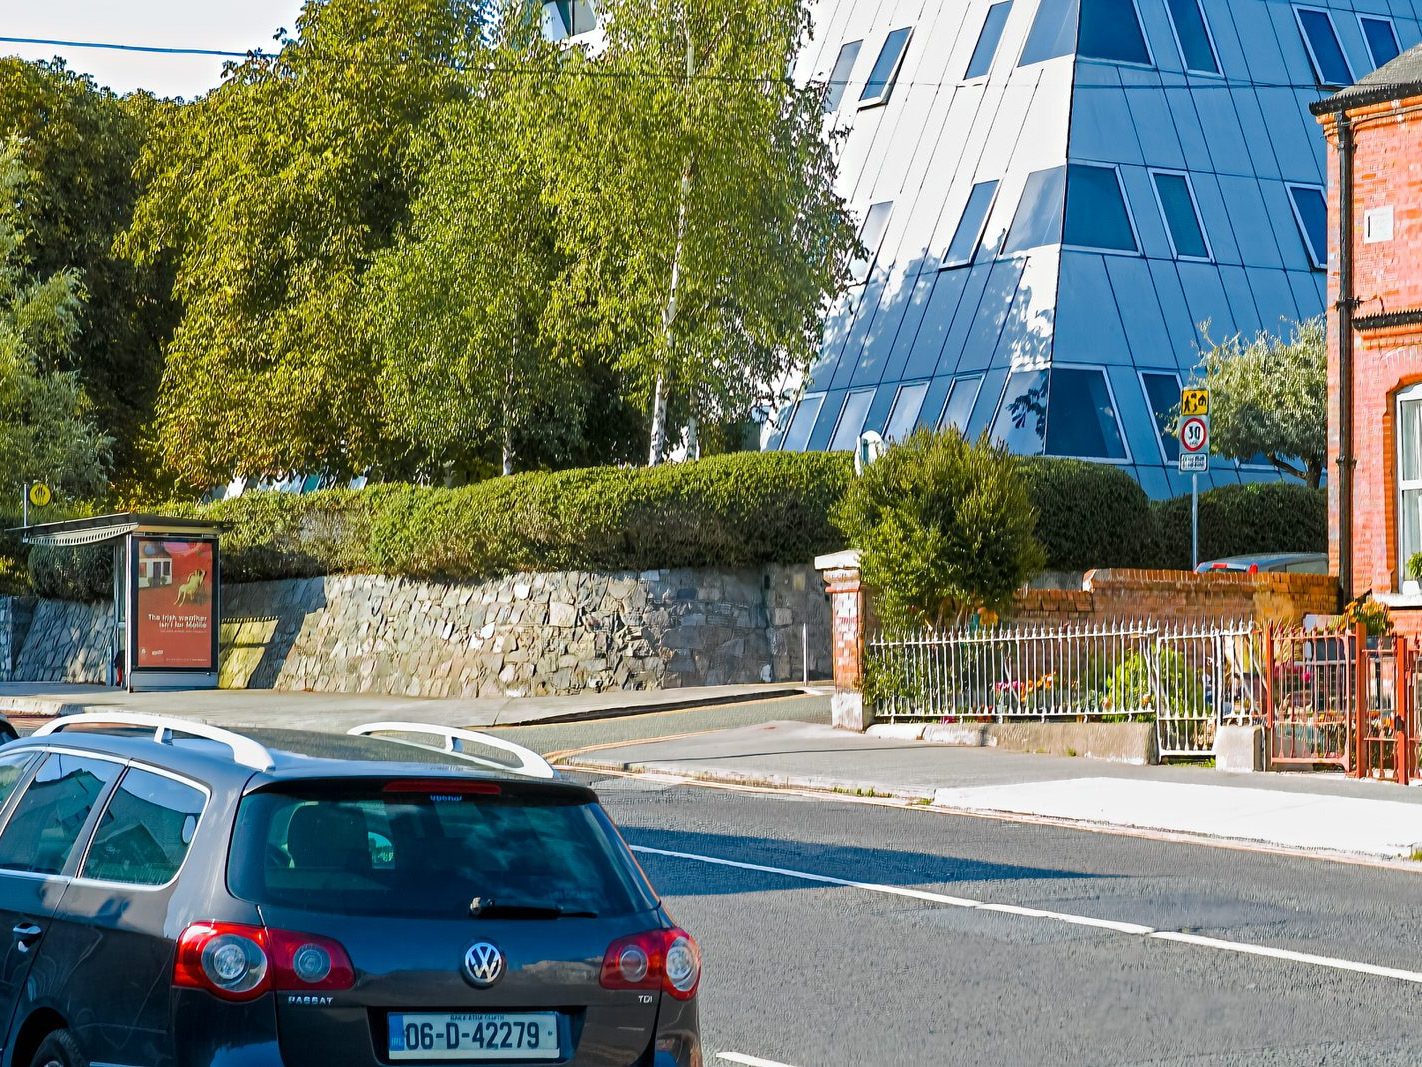 IRISH METEOROLOGICAL OFFICE BUILDING [TODAY I TOOK THE OPPORTUNITY TO VISIT GLASNEVIN HILL] 002